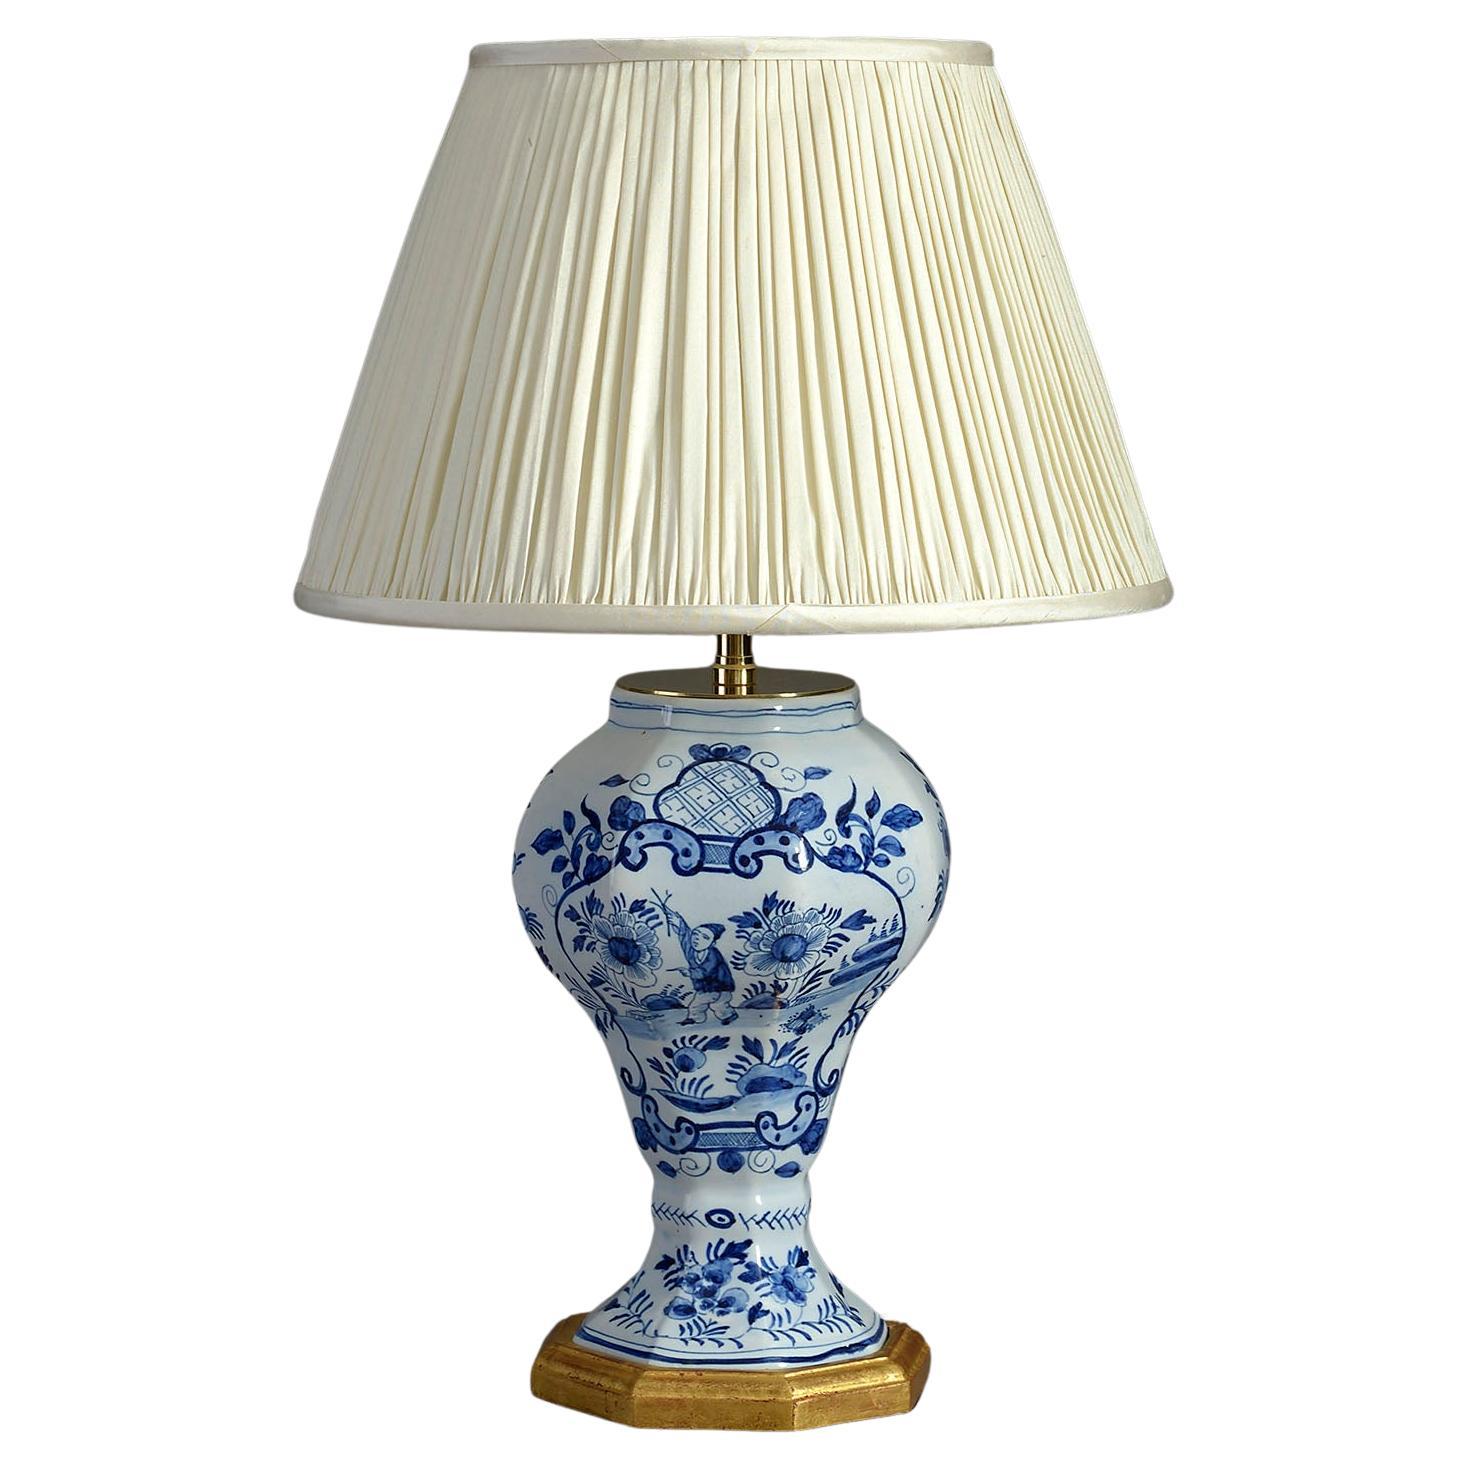 Early 20th Century, Blue and White Delft Pottery Vase Lamp For Sale